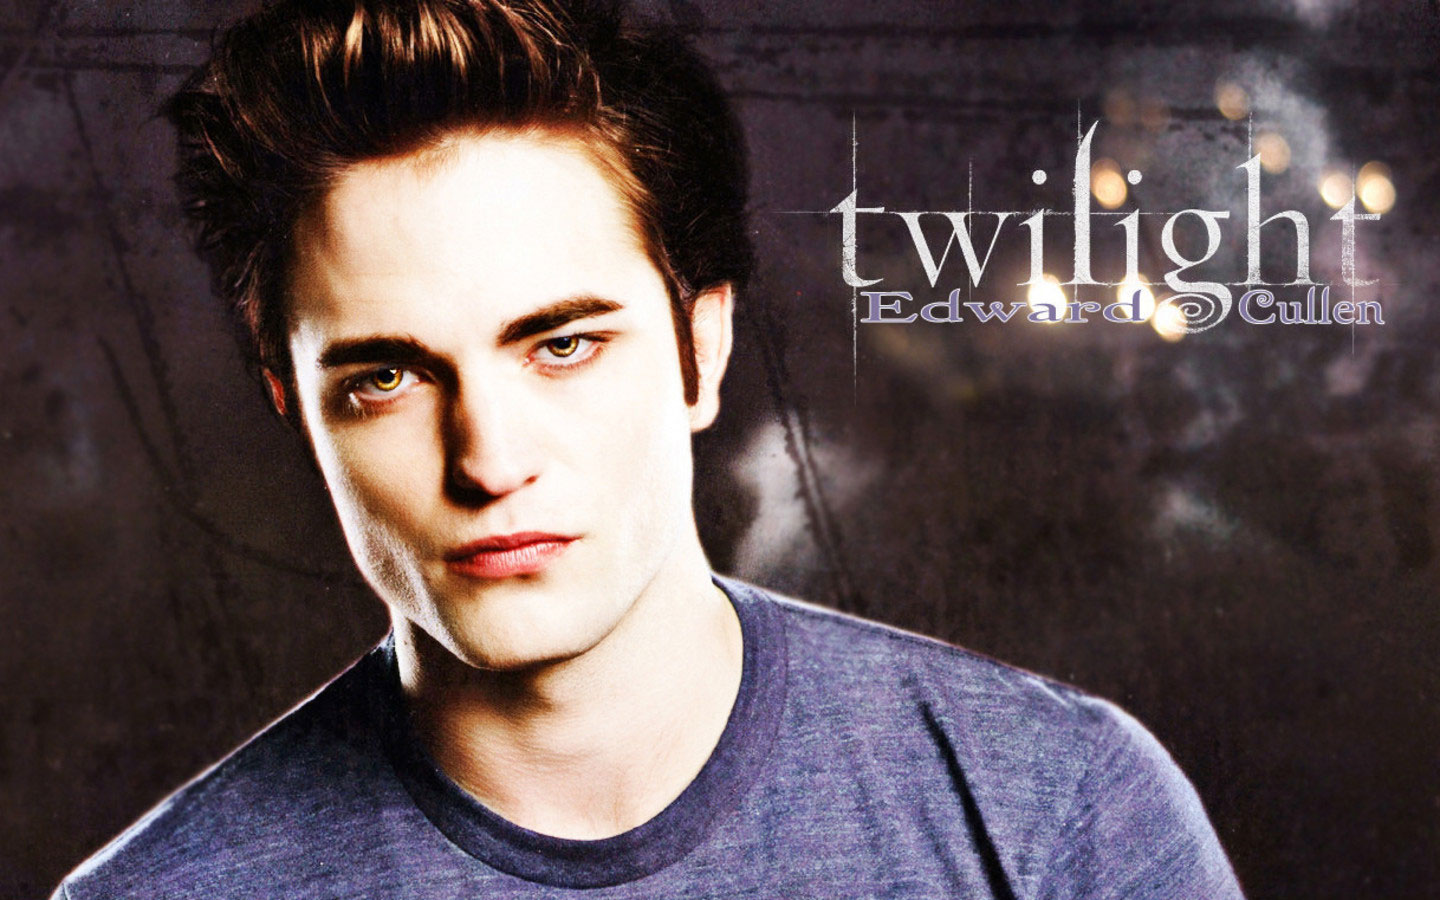 Edward Cullen Twilight Wallpaper Images amp Pictures   Becuo 1440x900